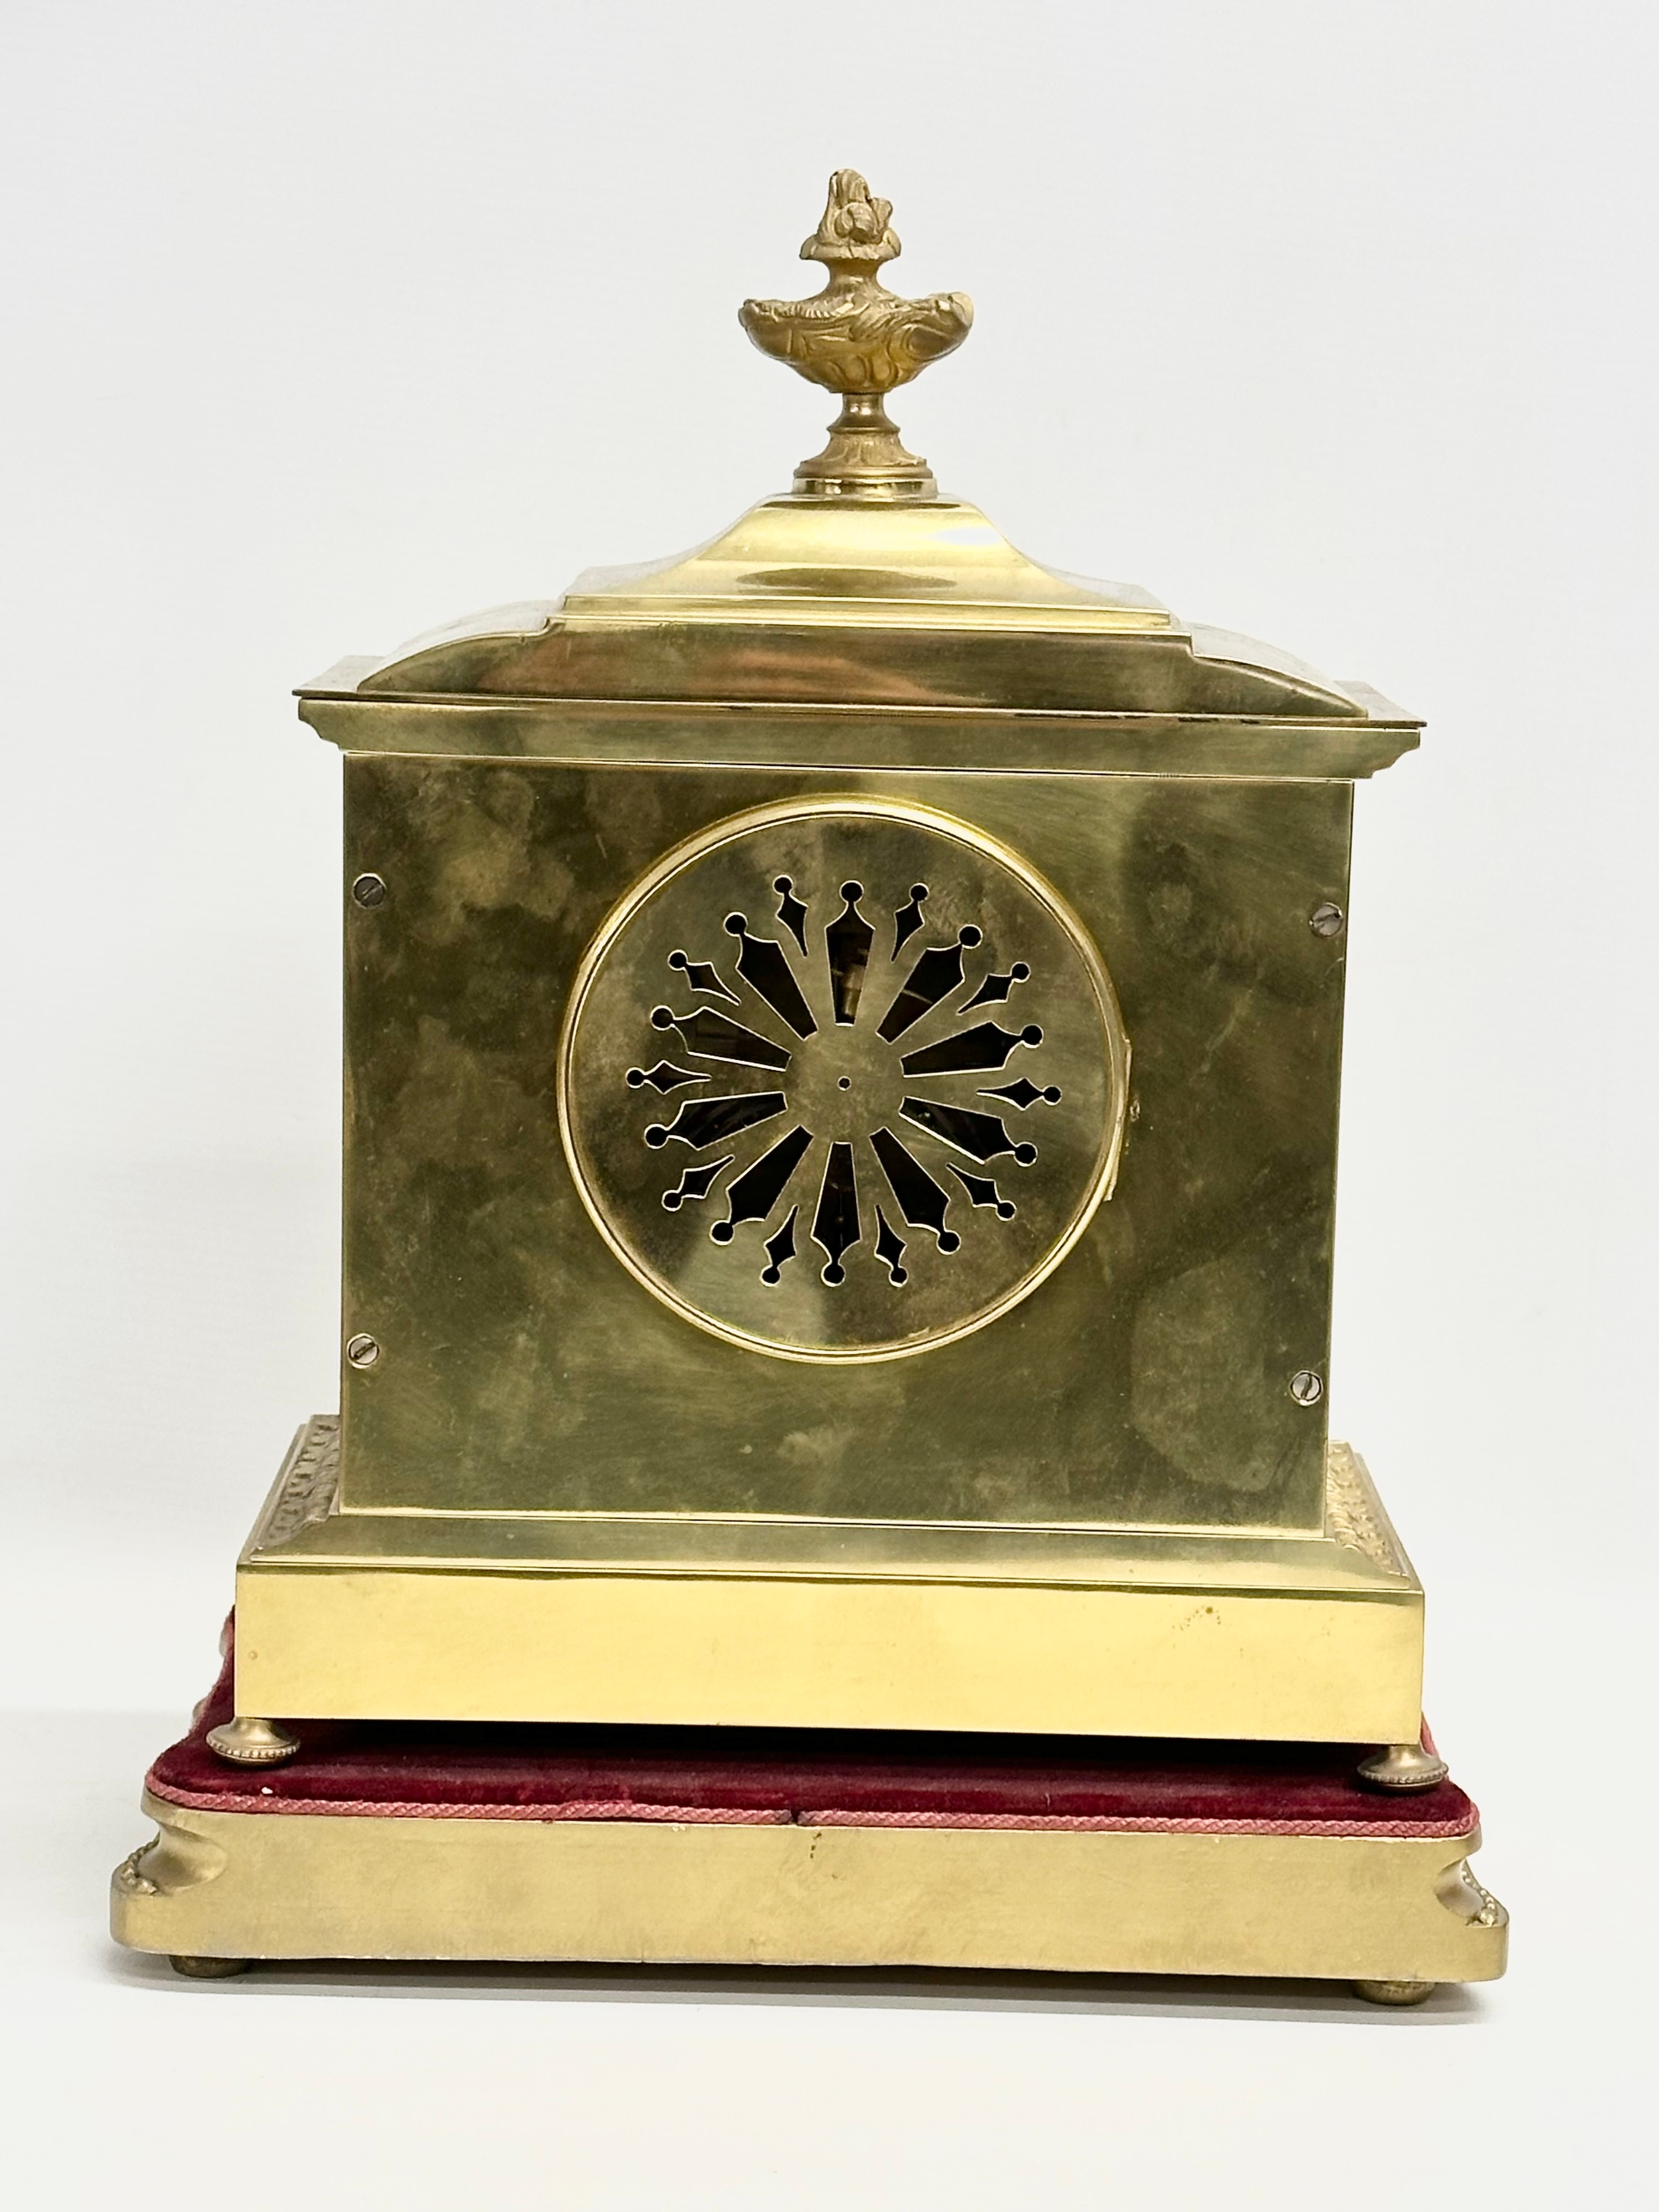 A late 19th century French brass mantle clock on stand. L. Marti Medaille D’Argent 1889. With key - Image 7 of 9